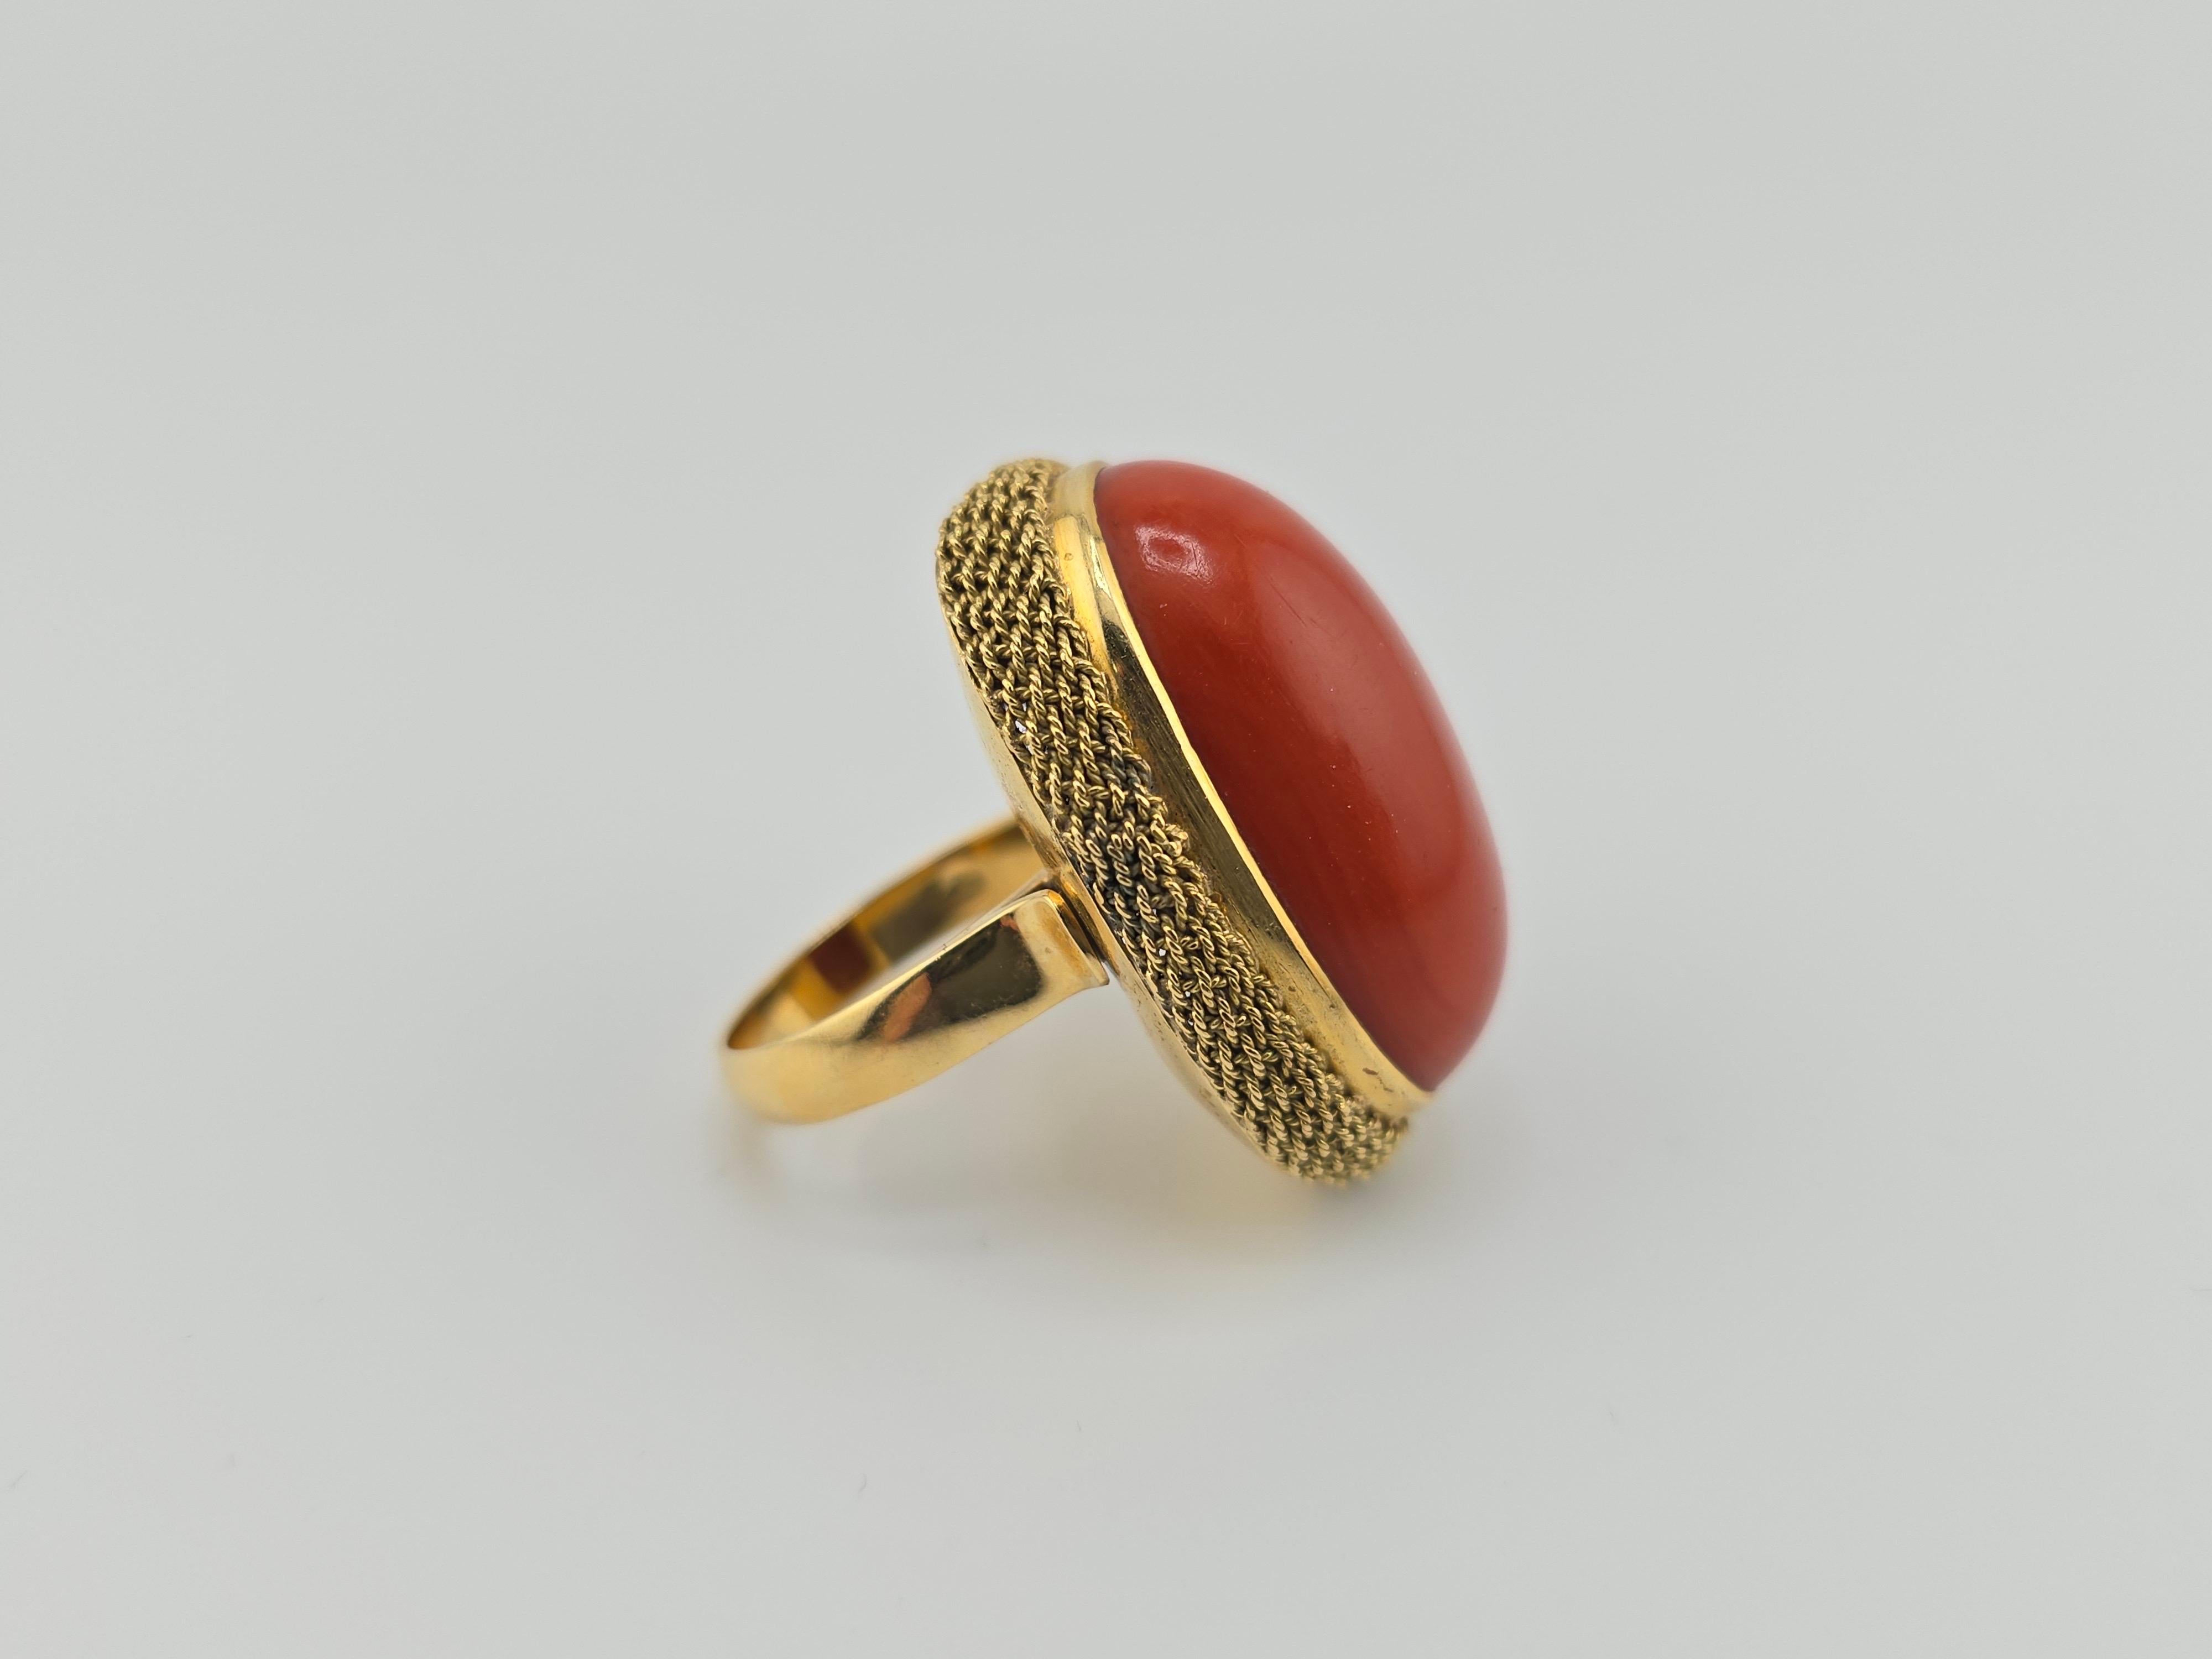 Outstanding 18K Yellow Gold Deep Red Coral Ring With Massive Coral Gem 1